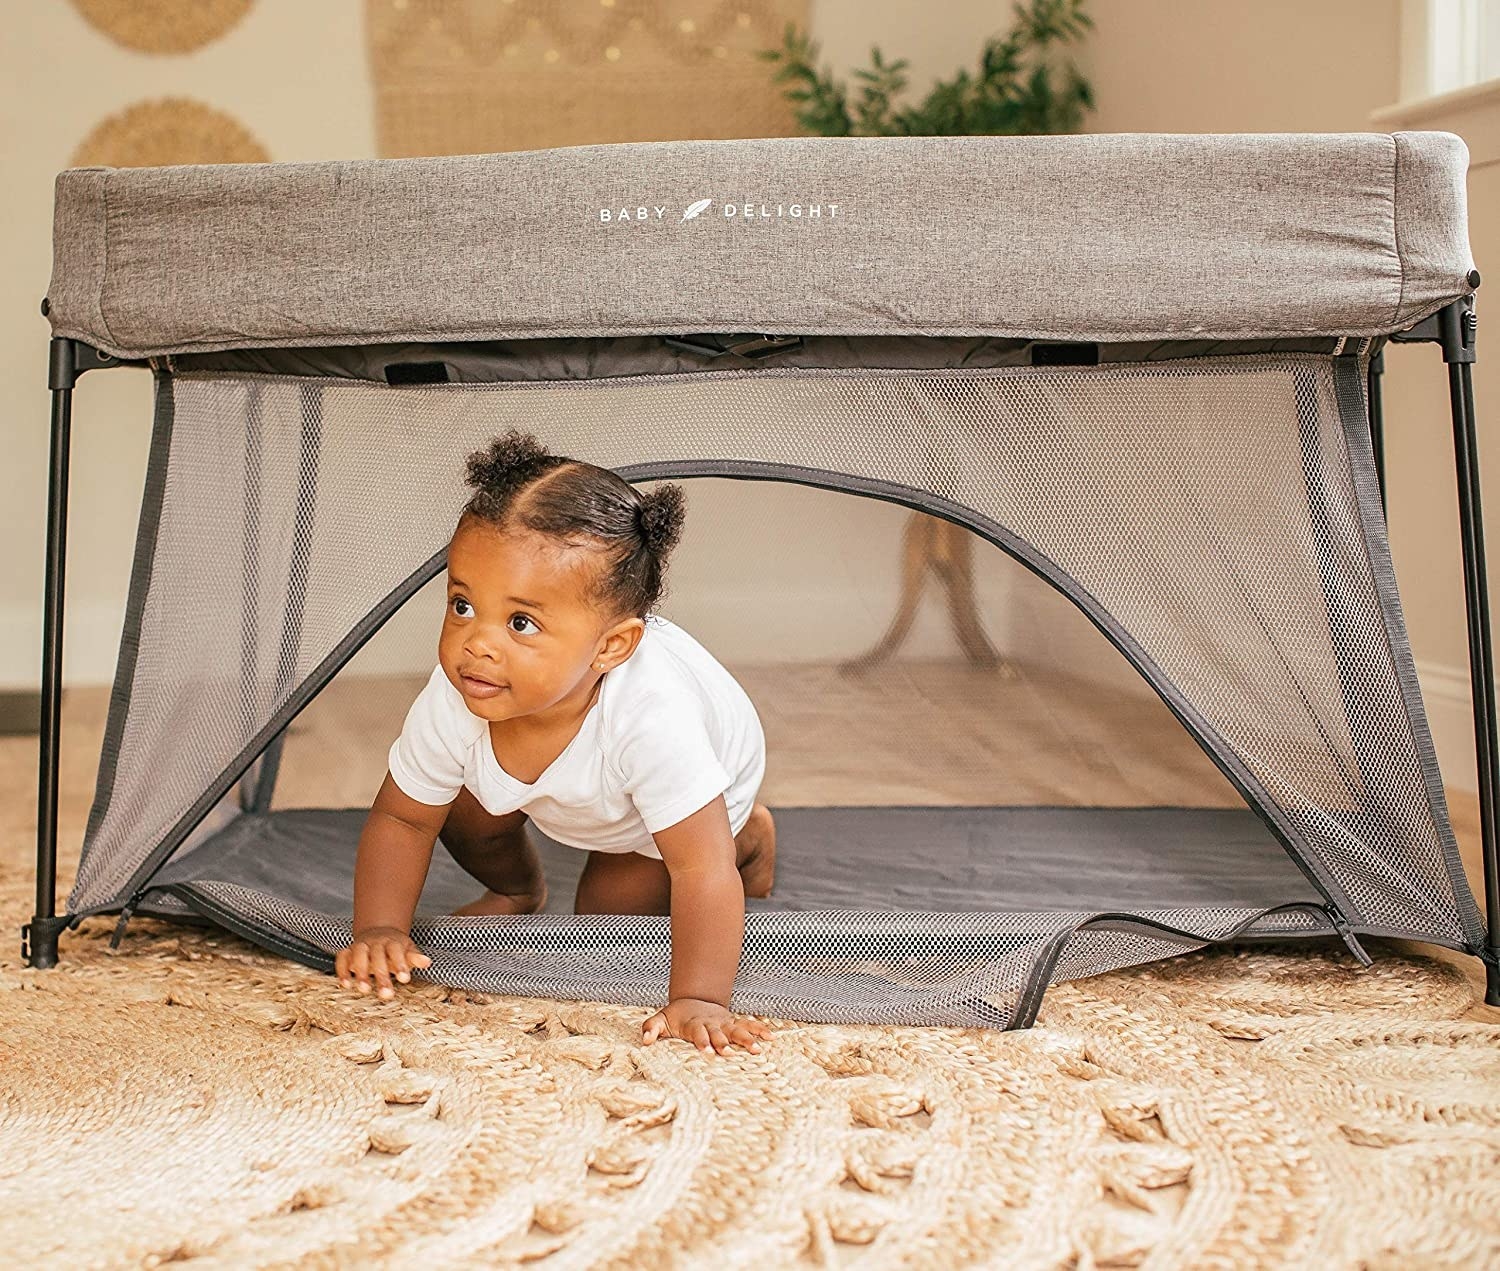 A baby crawling out of the bottom door in the mesh play space. All sides are clear mesh with a fabric cover on the top, covering the adjustable poles that create the frame